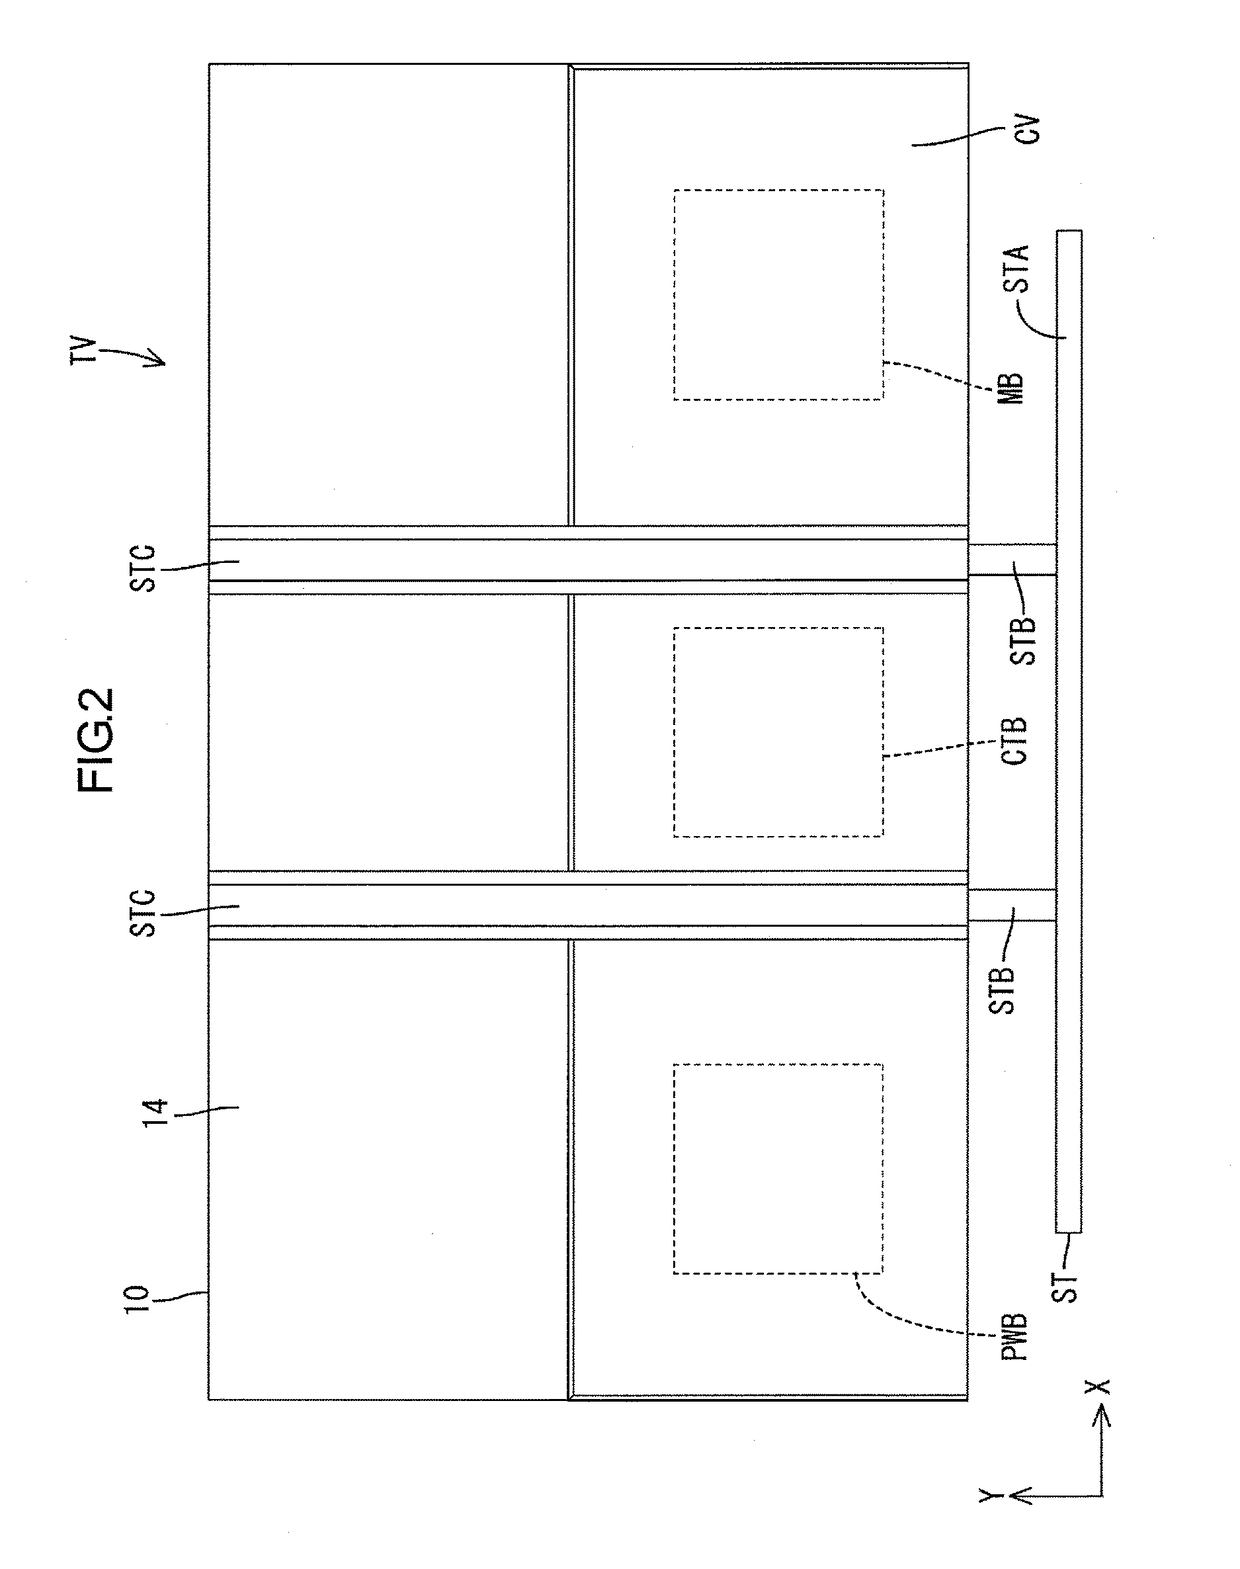 Lighting device, display device, and television device